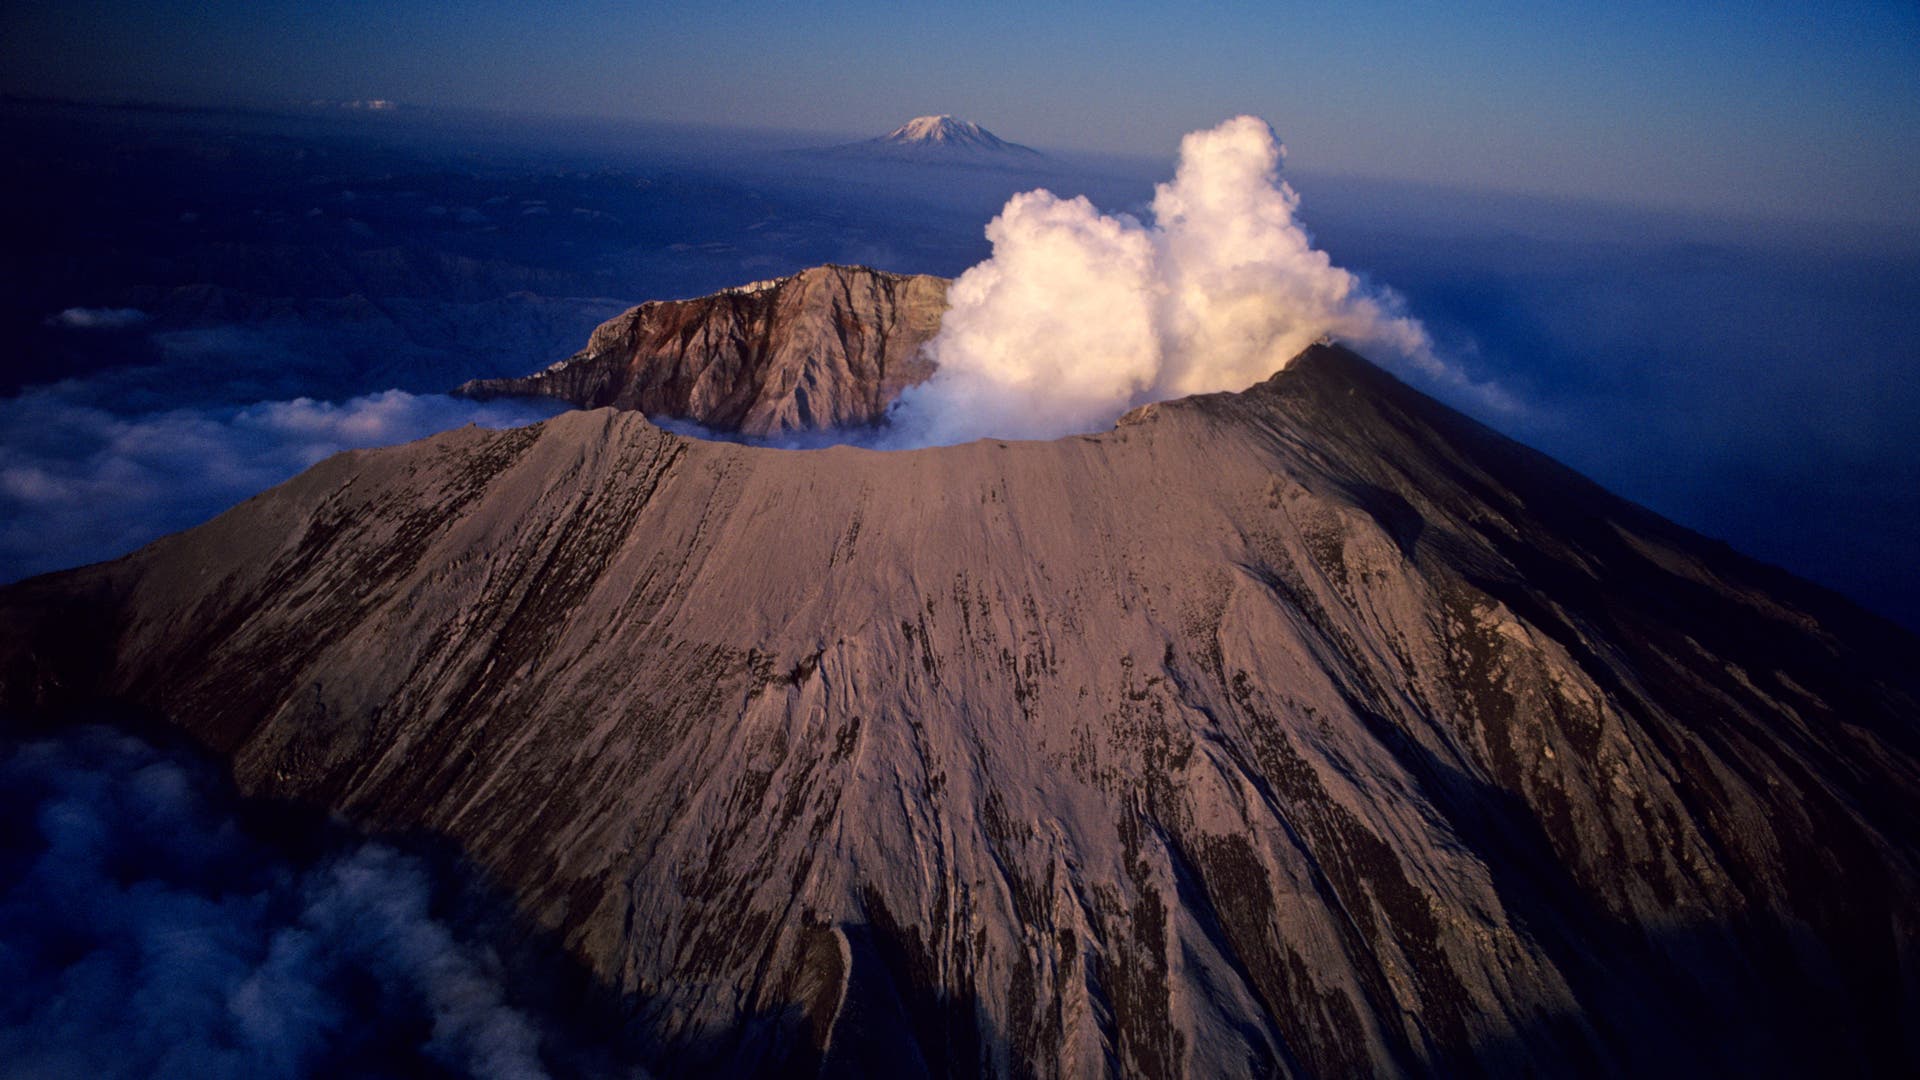 Smoking Horseshoe-Shaped Crater Top Of Mount Saint Helens After A Major Eruption May 18 1980